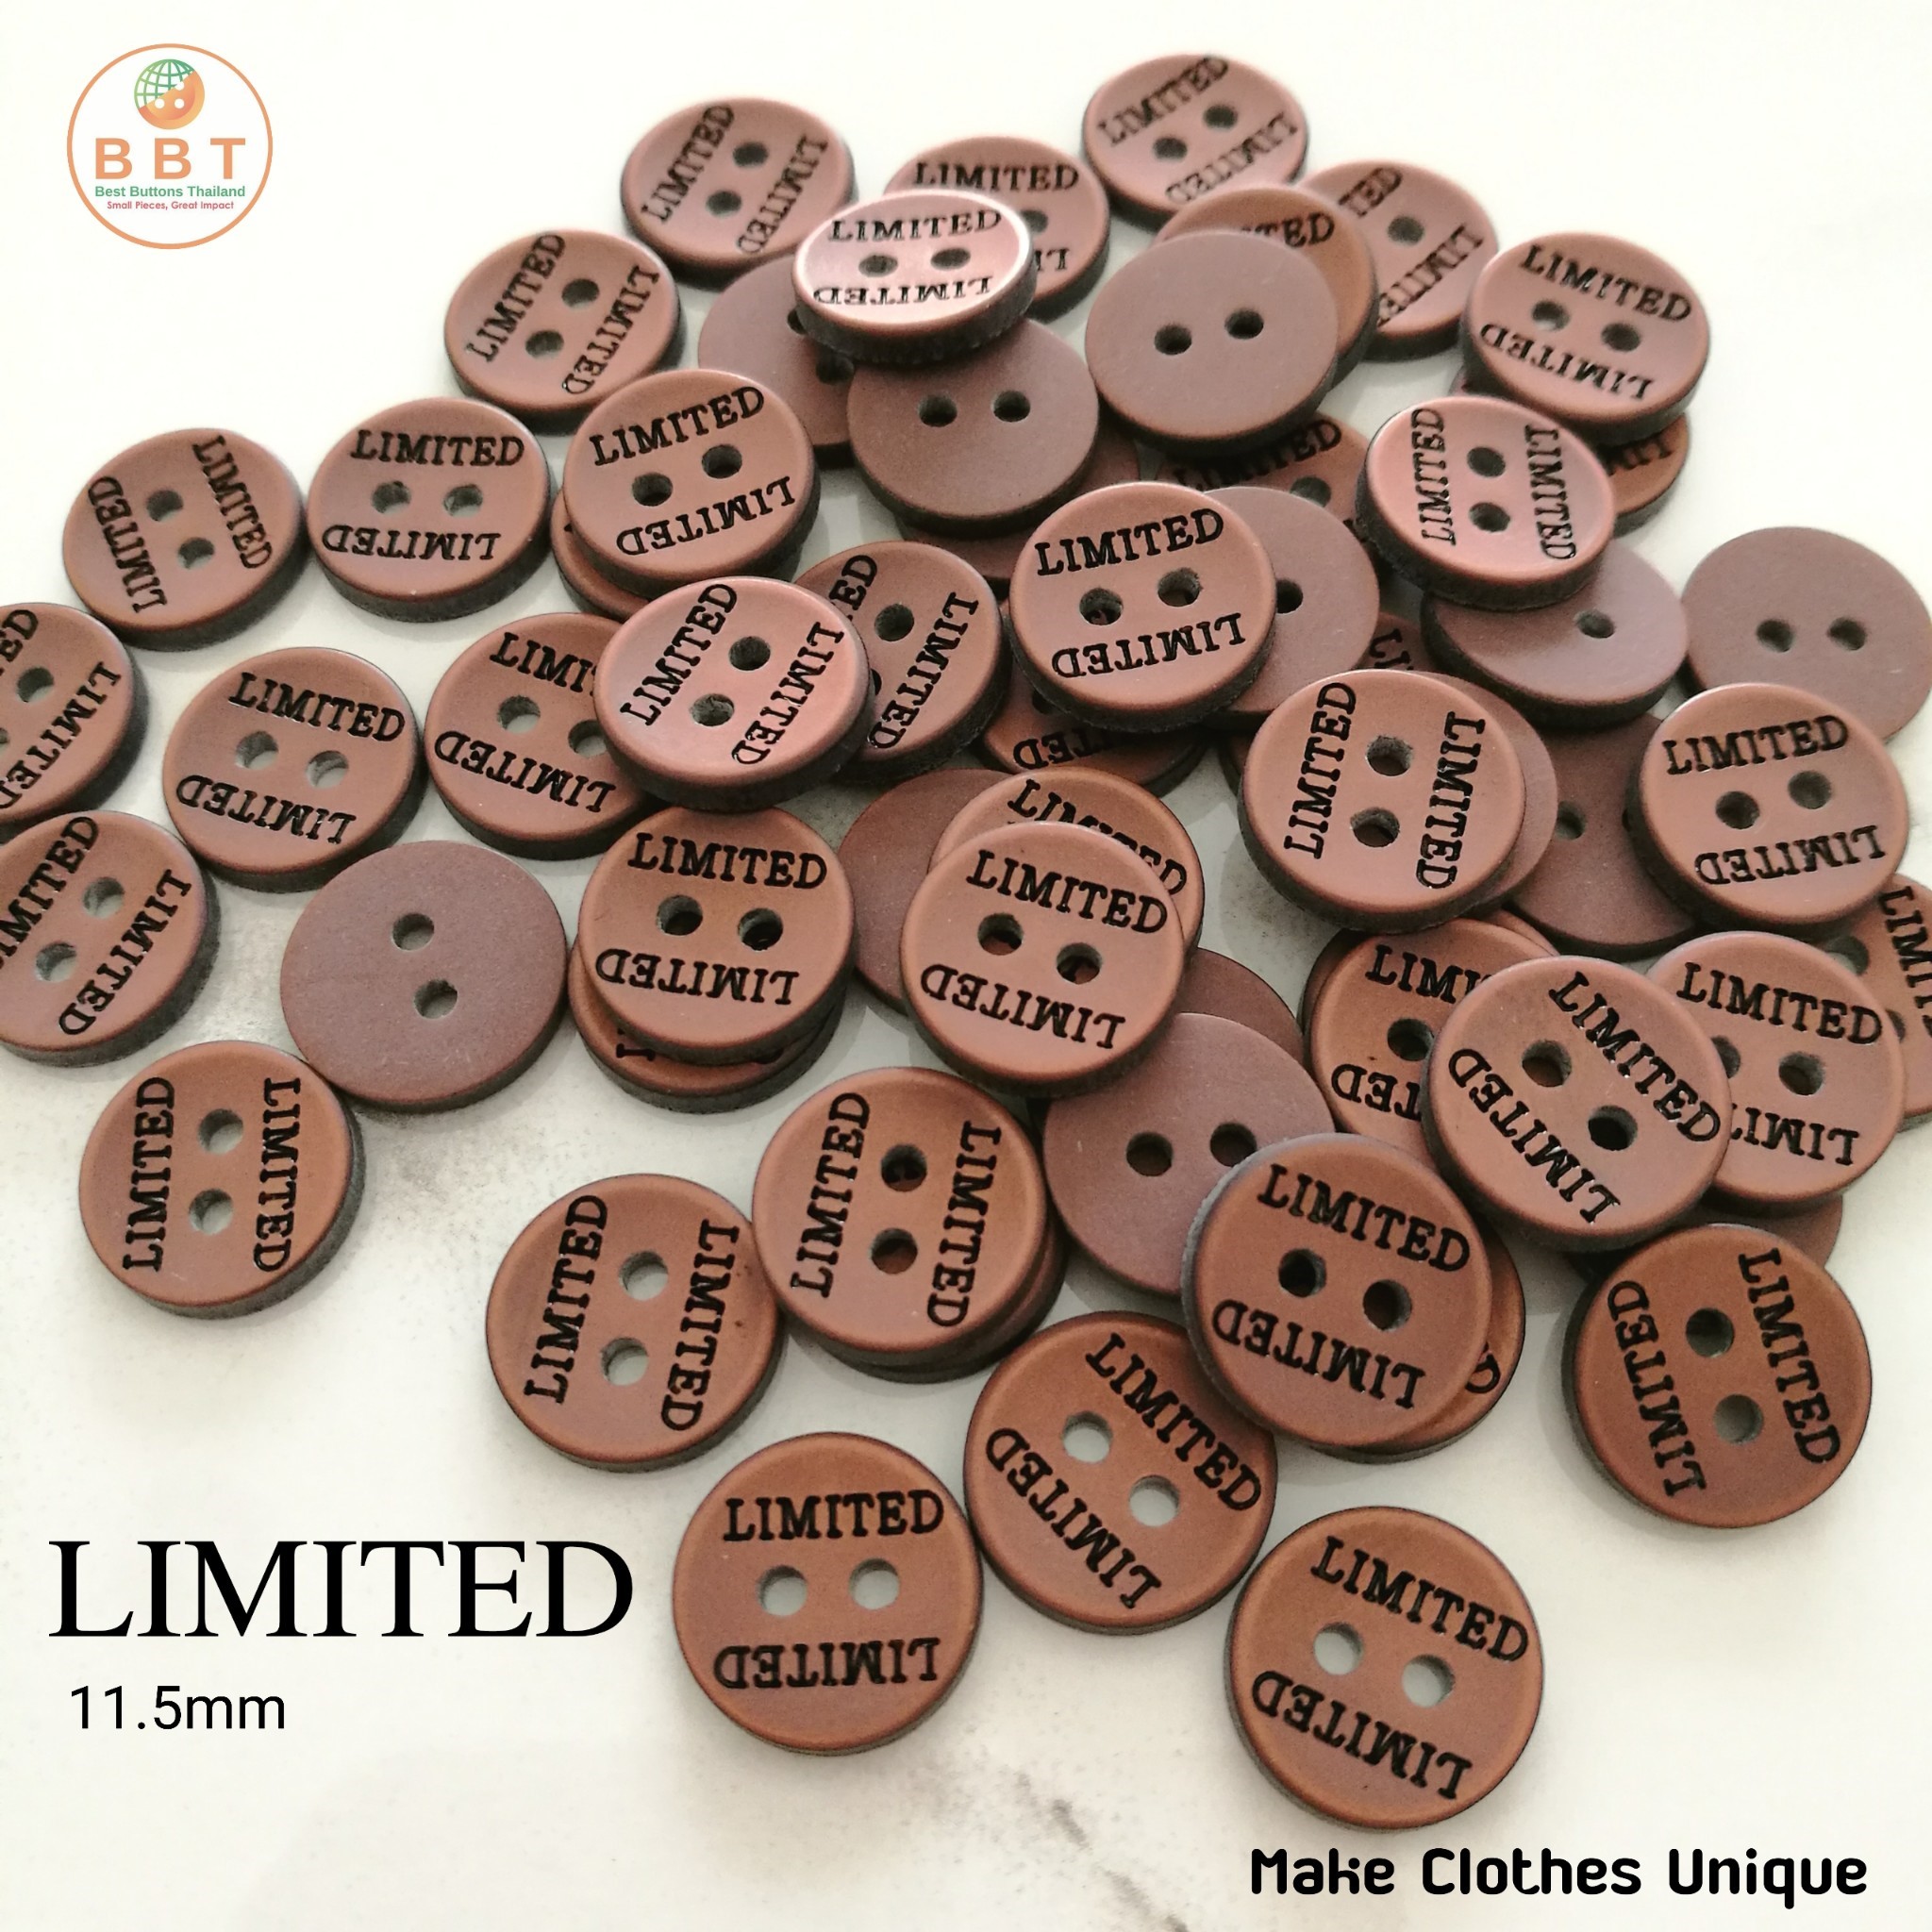 Engraving Buttons "LIMITED" in Copper